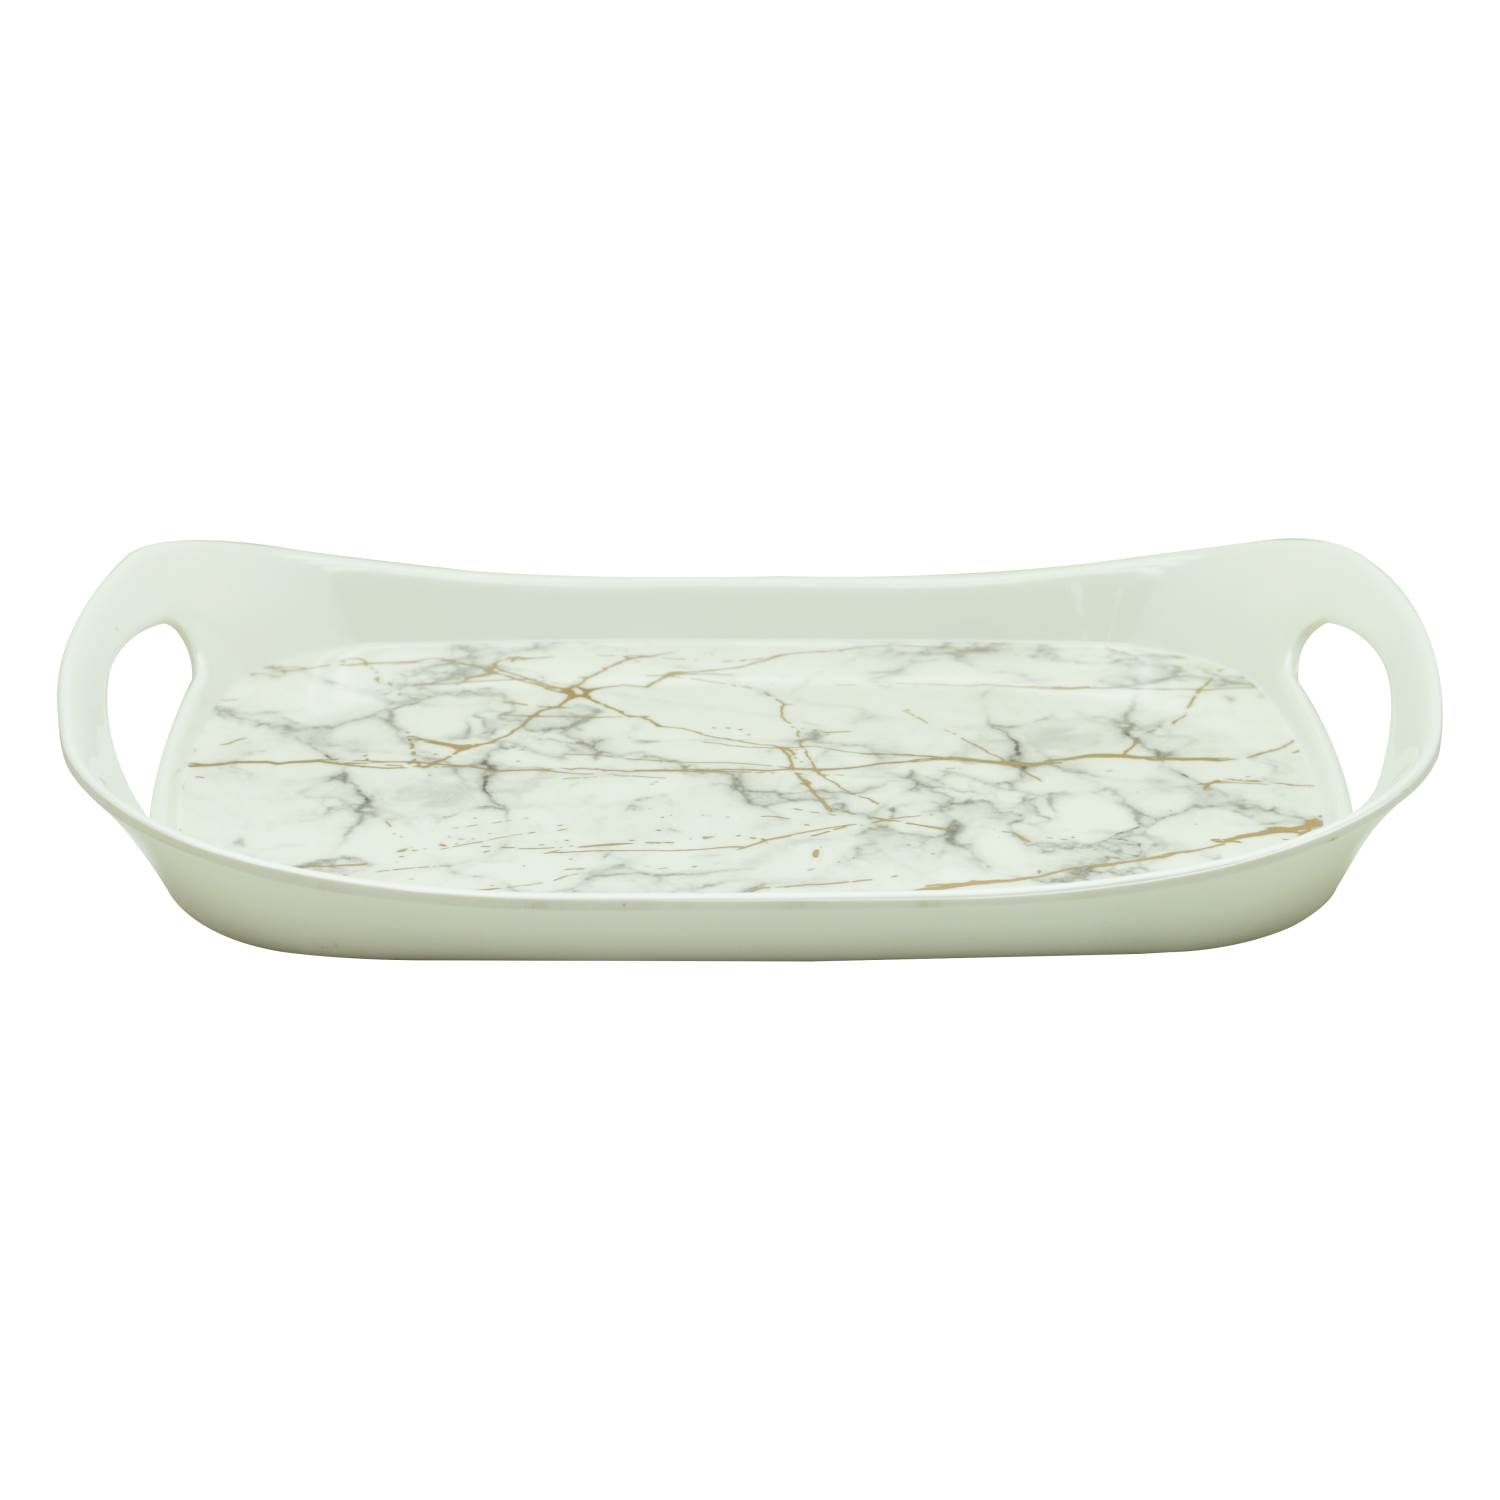 Rk Comfort Tray Small White Static Gold, Dwt1024Wsg, 12.25" X 9"